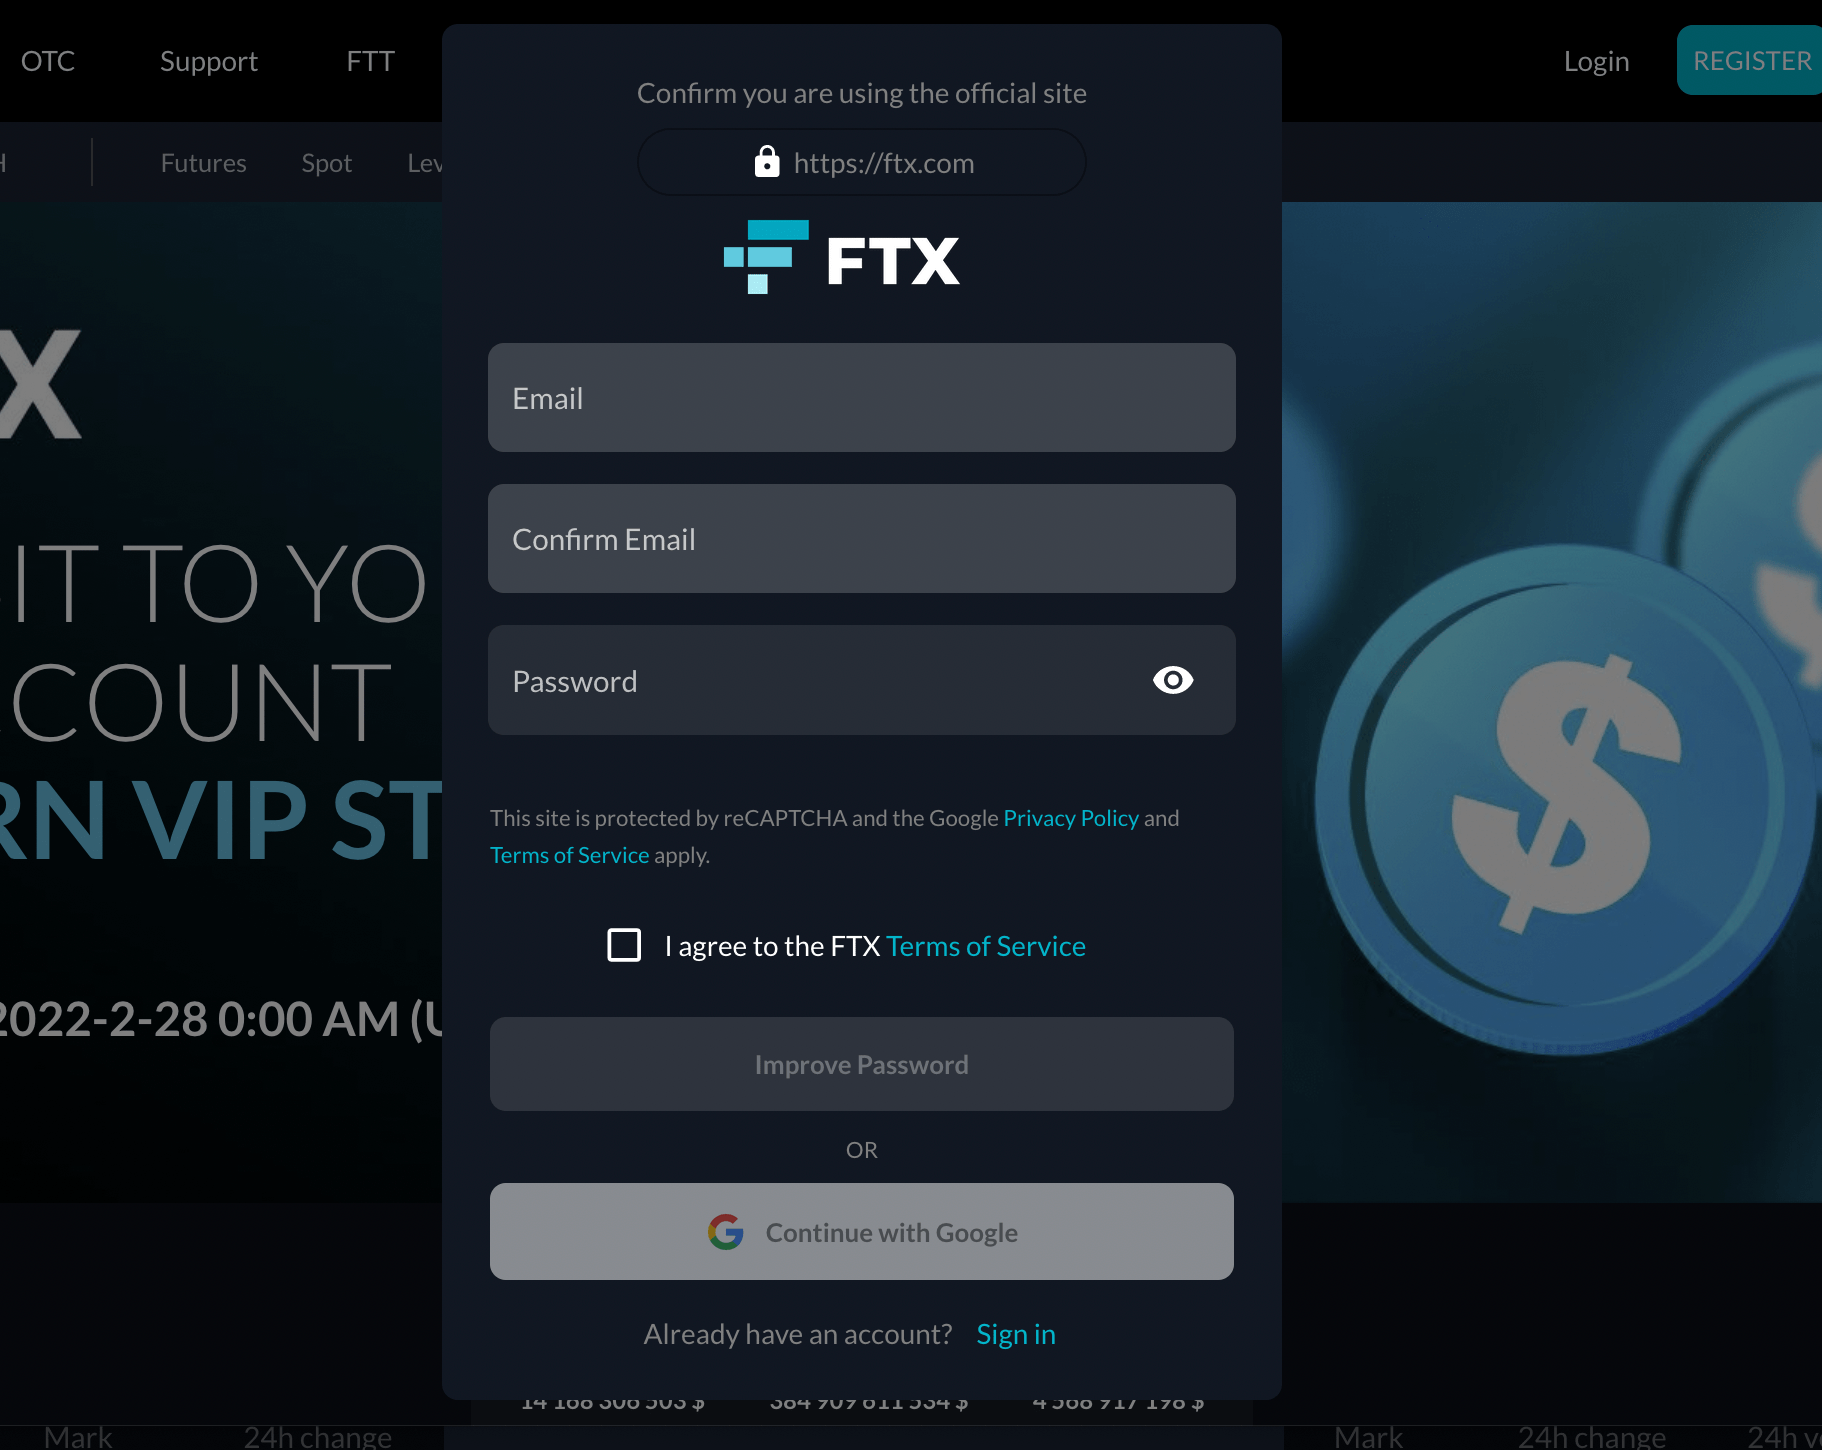 Opening an account on the FTX exchange